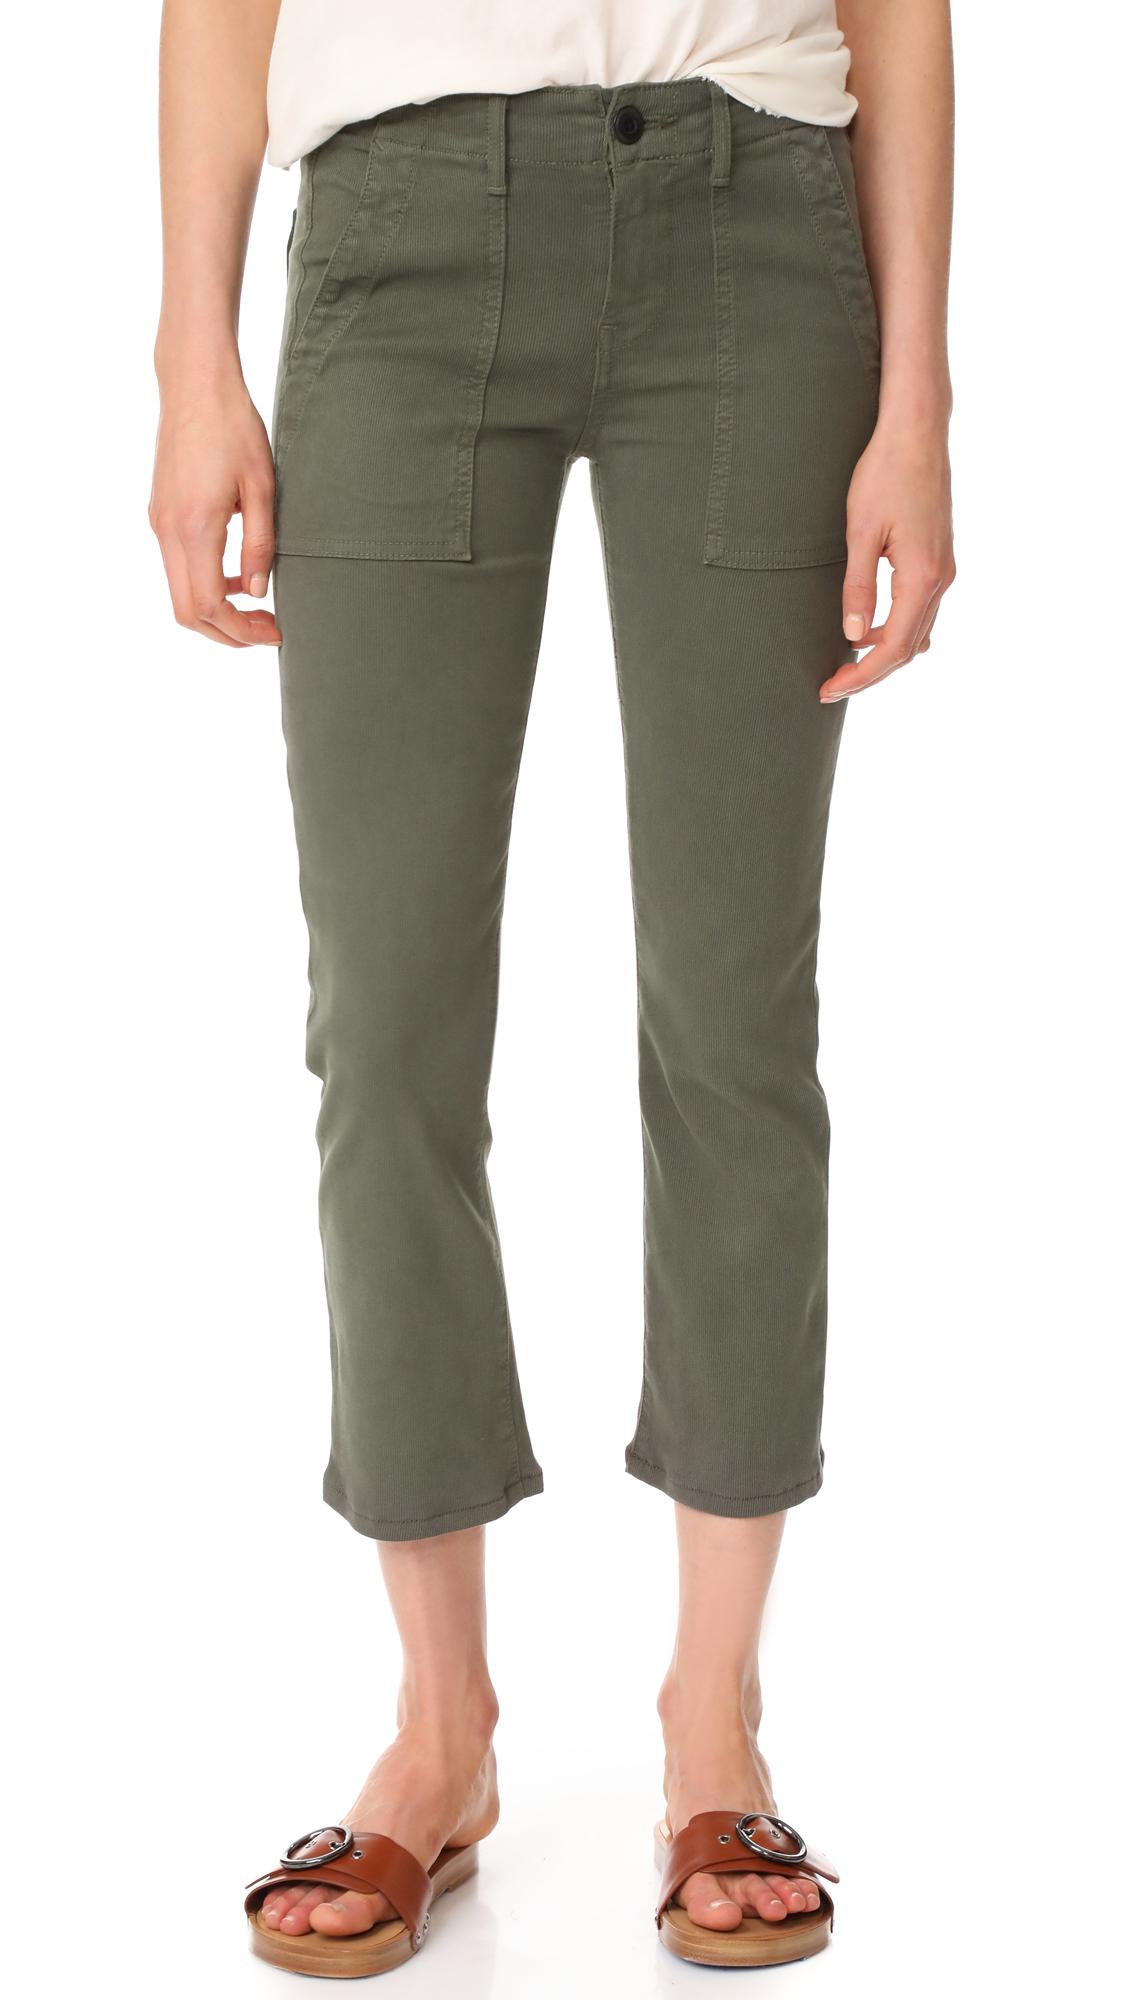 The Great Corduroy The Army Nerd Pants in Black Olive (Green) - Lyst